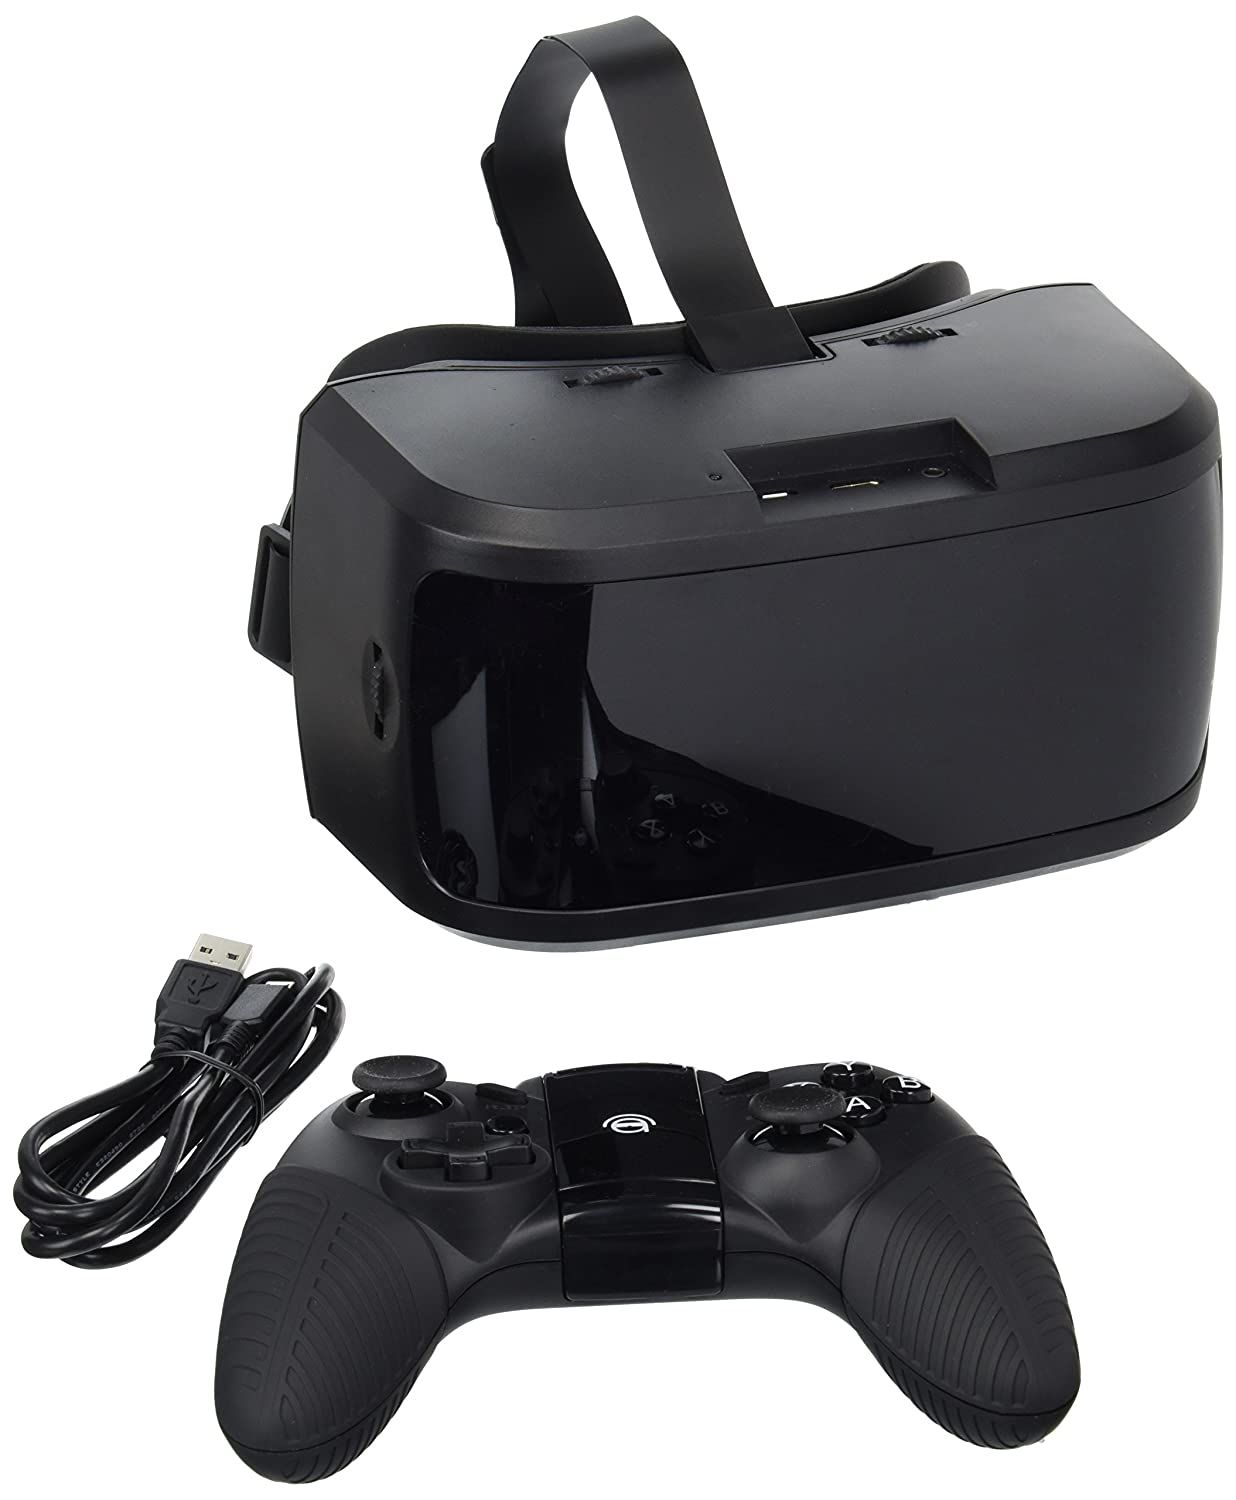 vr headset with built in procssor